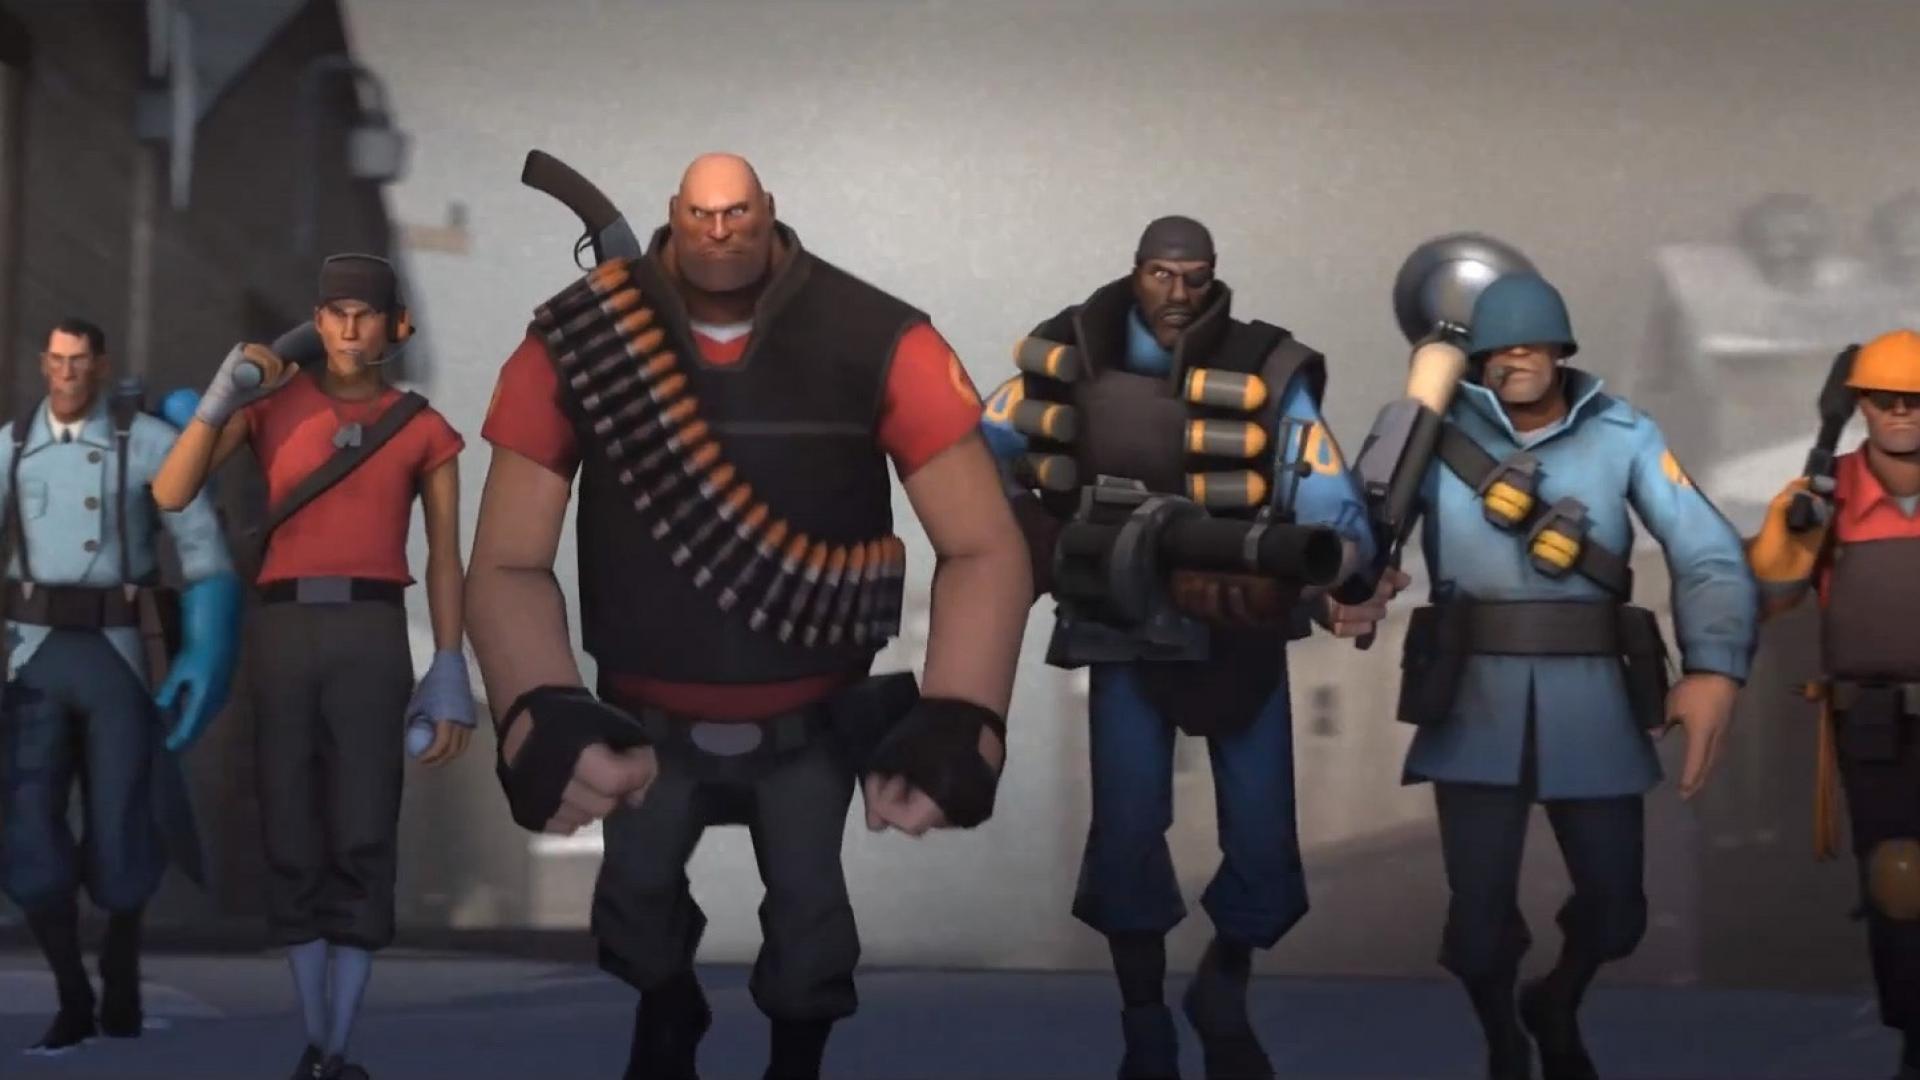 l 3xl team fortress 2 backgrounds